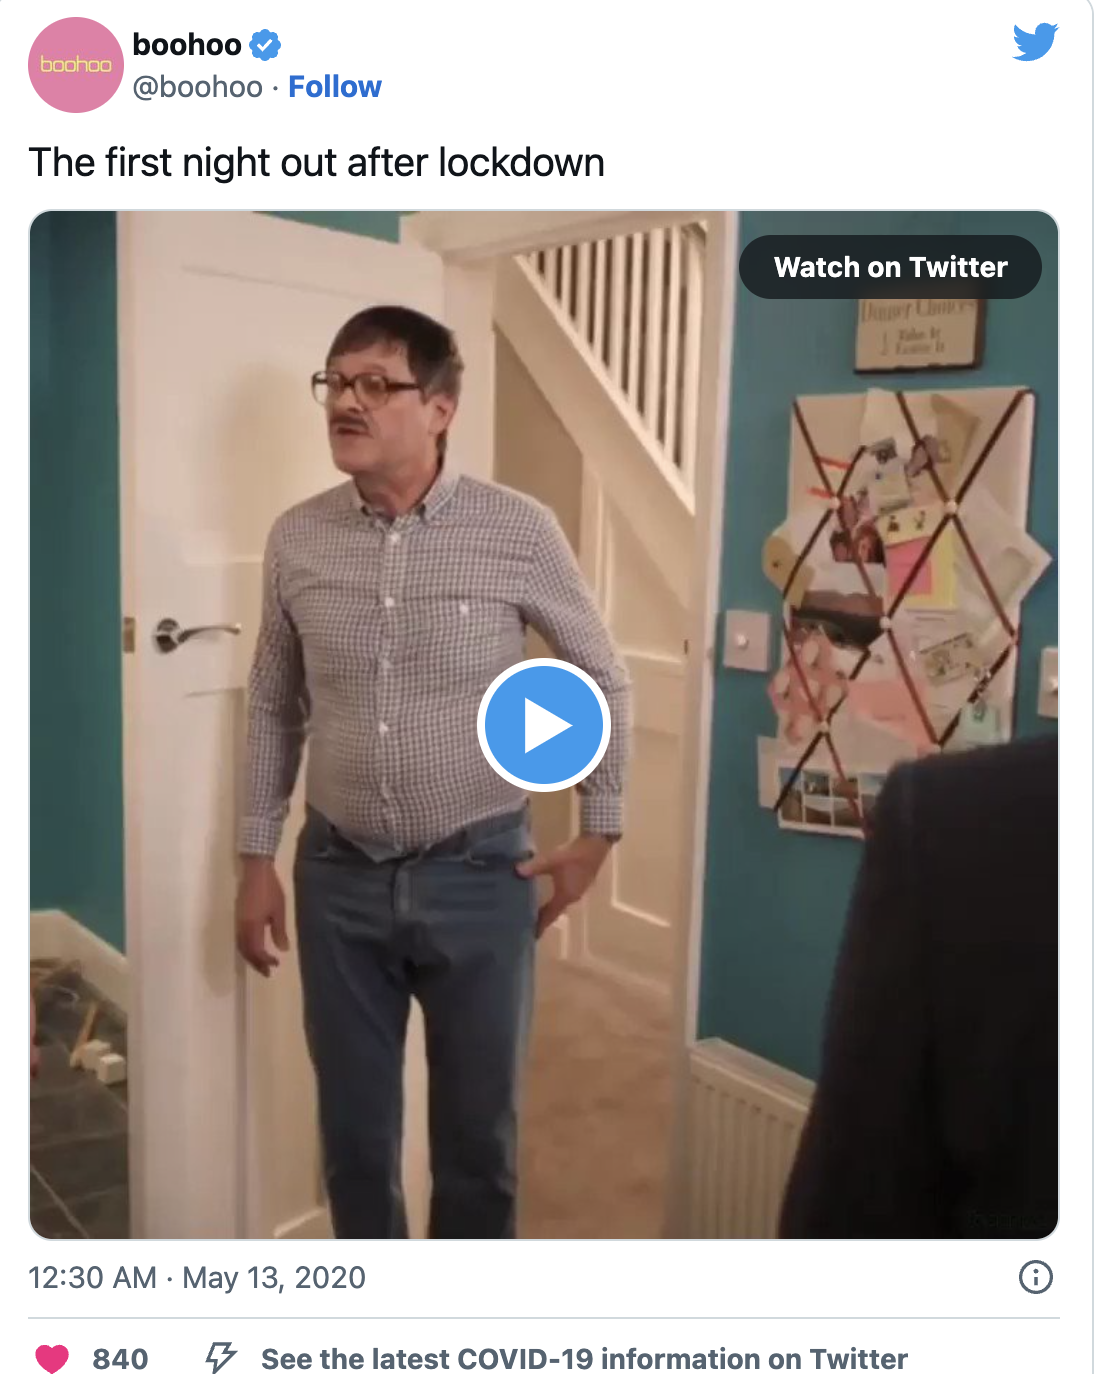 A video tweet by Boohoo that features lockdown-inspired content.